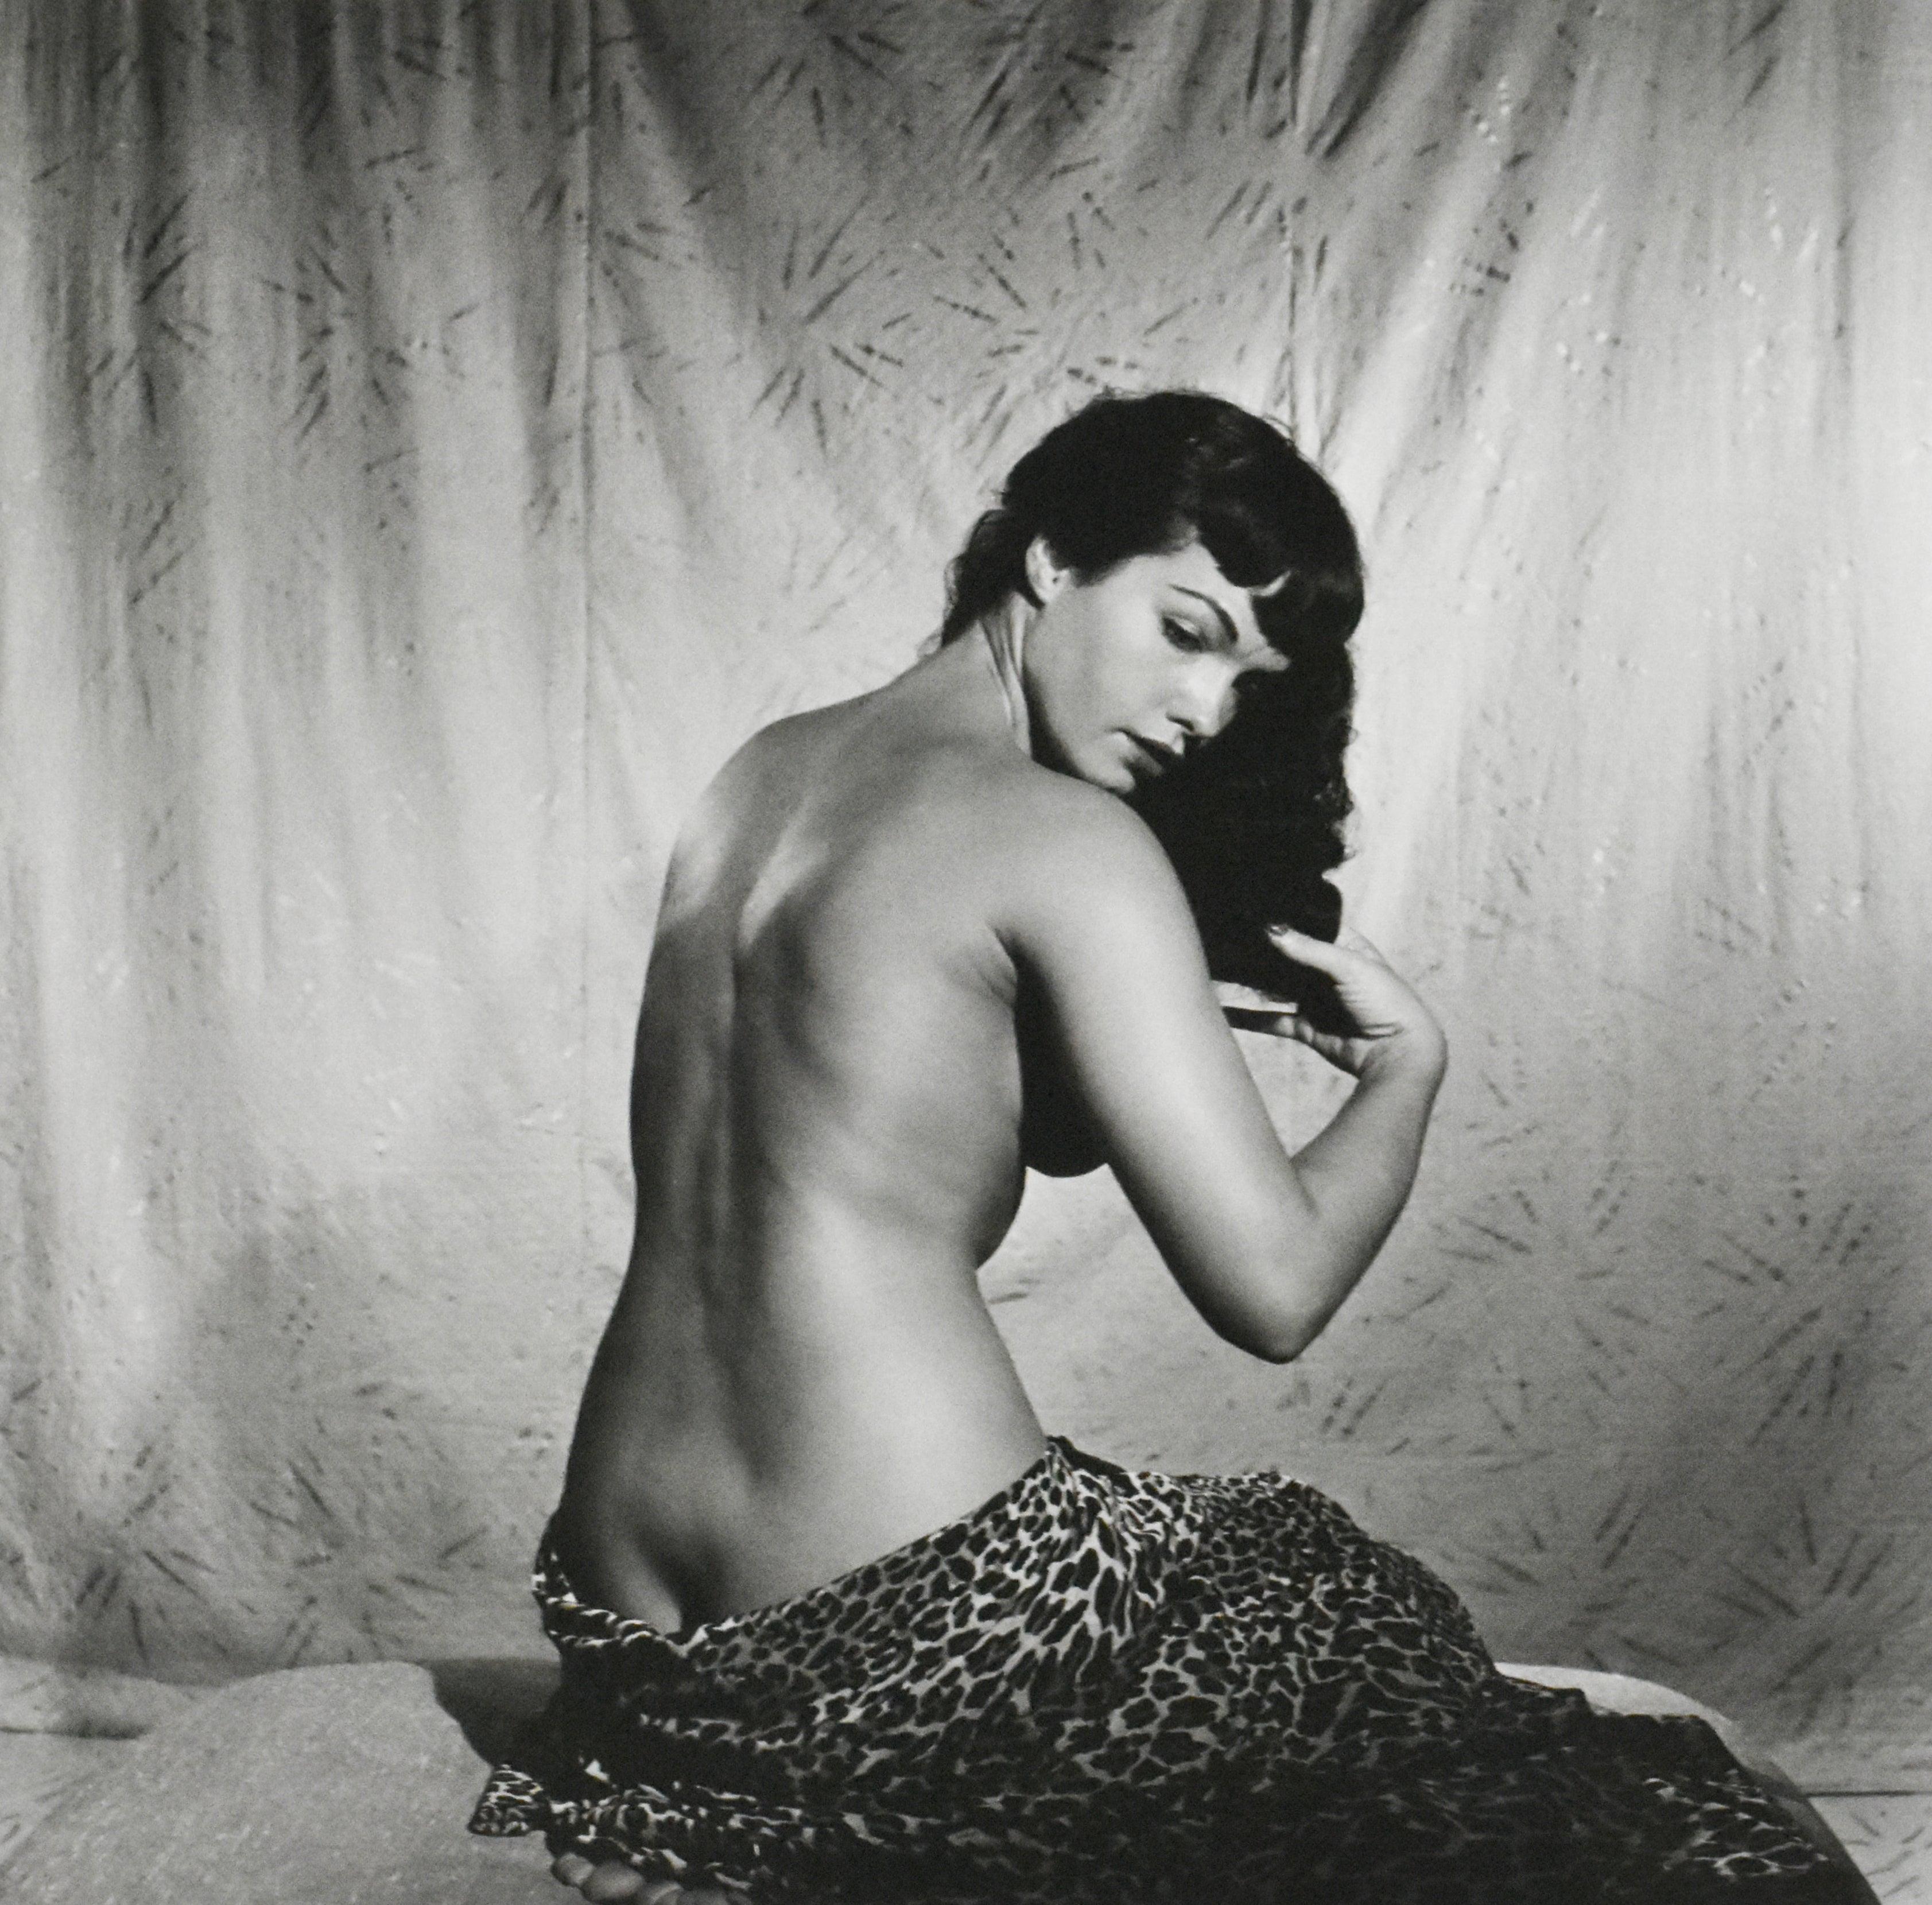 Bettie Page 'Brushing Hair', First Shoot in 1954 - Photograph by Bunny Yeager